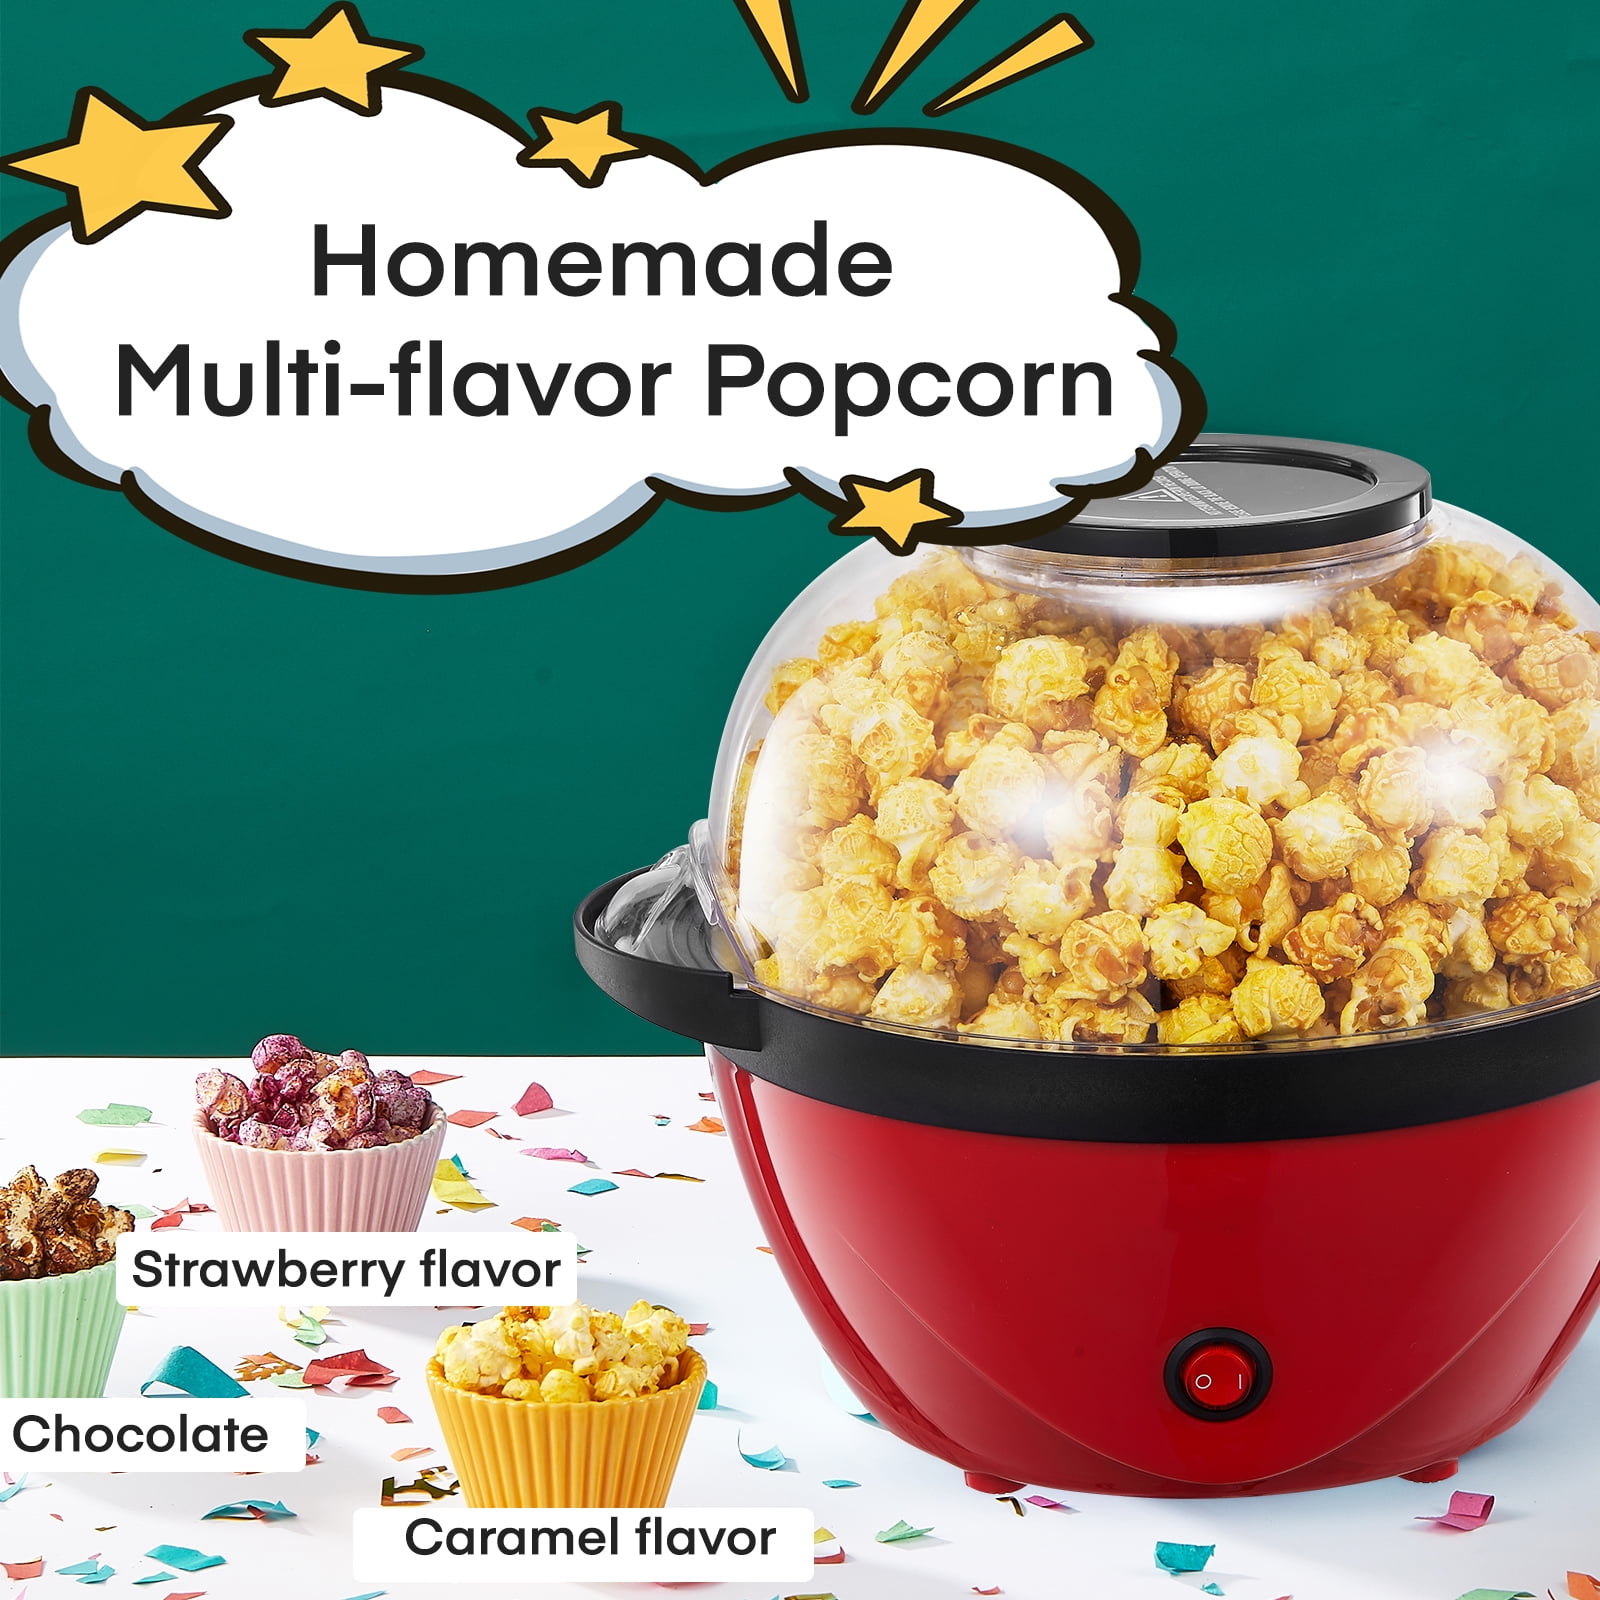 Popcorn Popper, 28cups Popcorn Machine with Stirring Rod, Detachable &  Nonstick Plate, Hot Oil Popcorn Maker Easy to Use, 6Qts Large Lid for  Serving